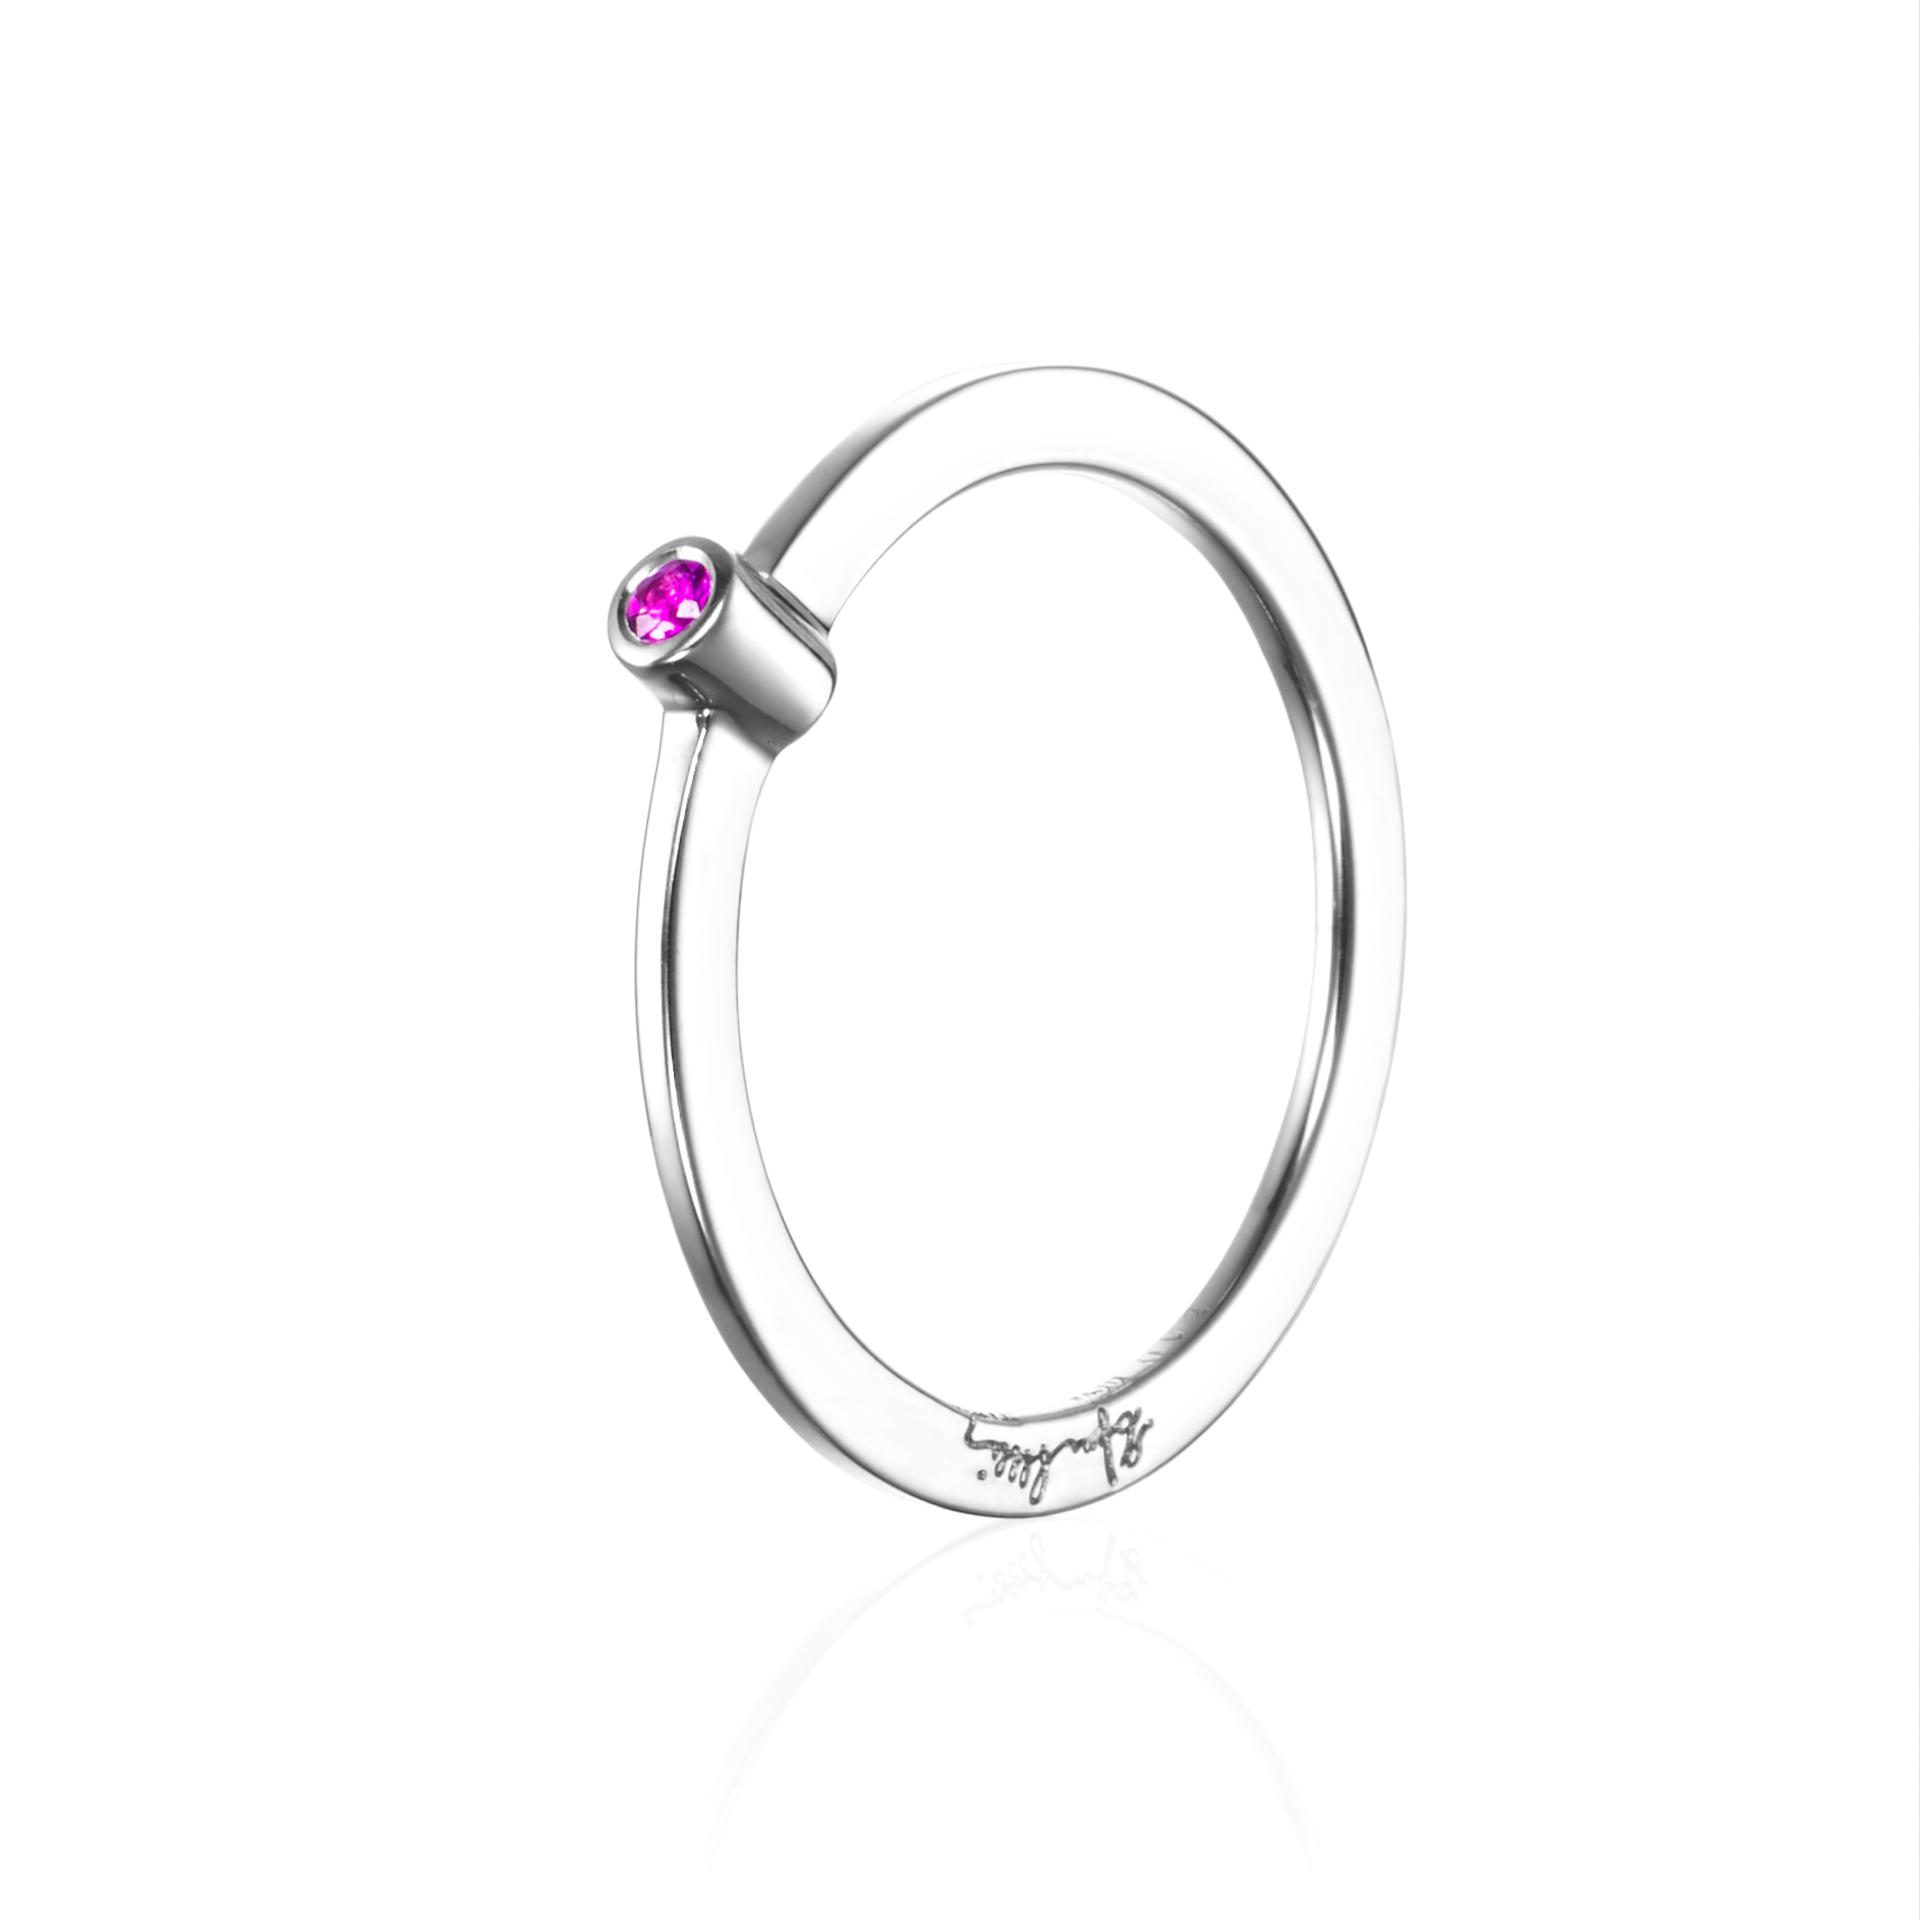 MICRO BLINK RING - PINK SAPPHIRE